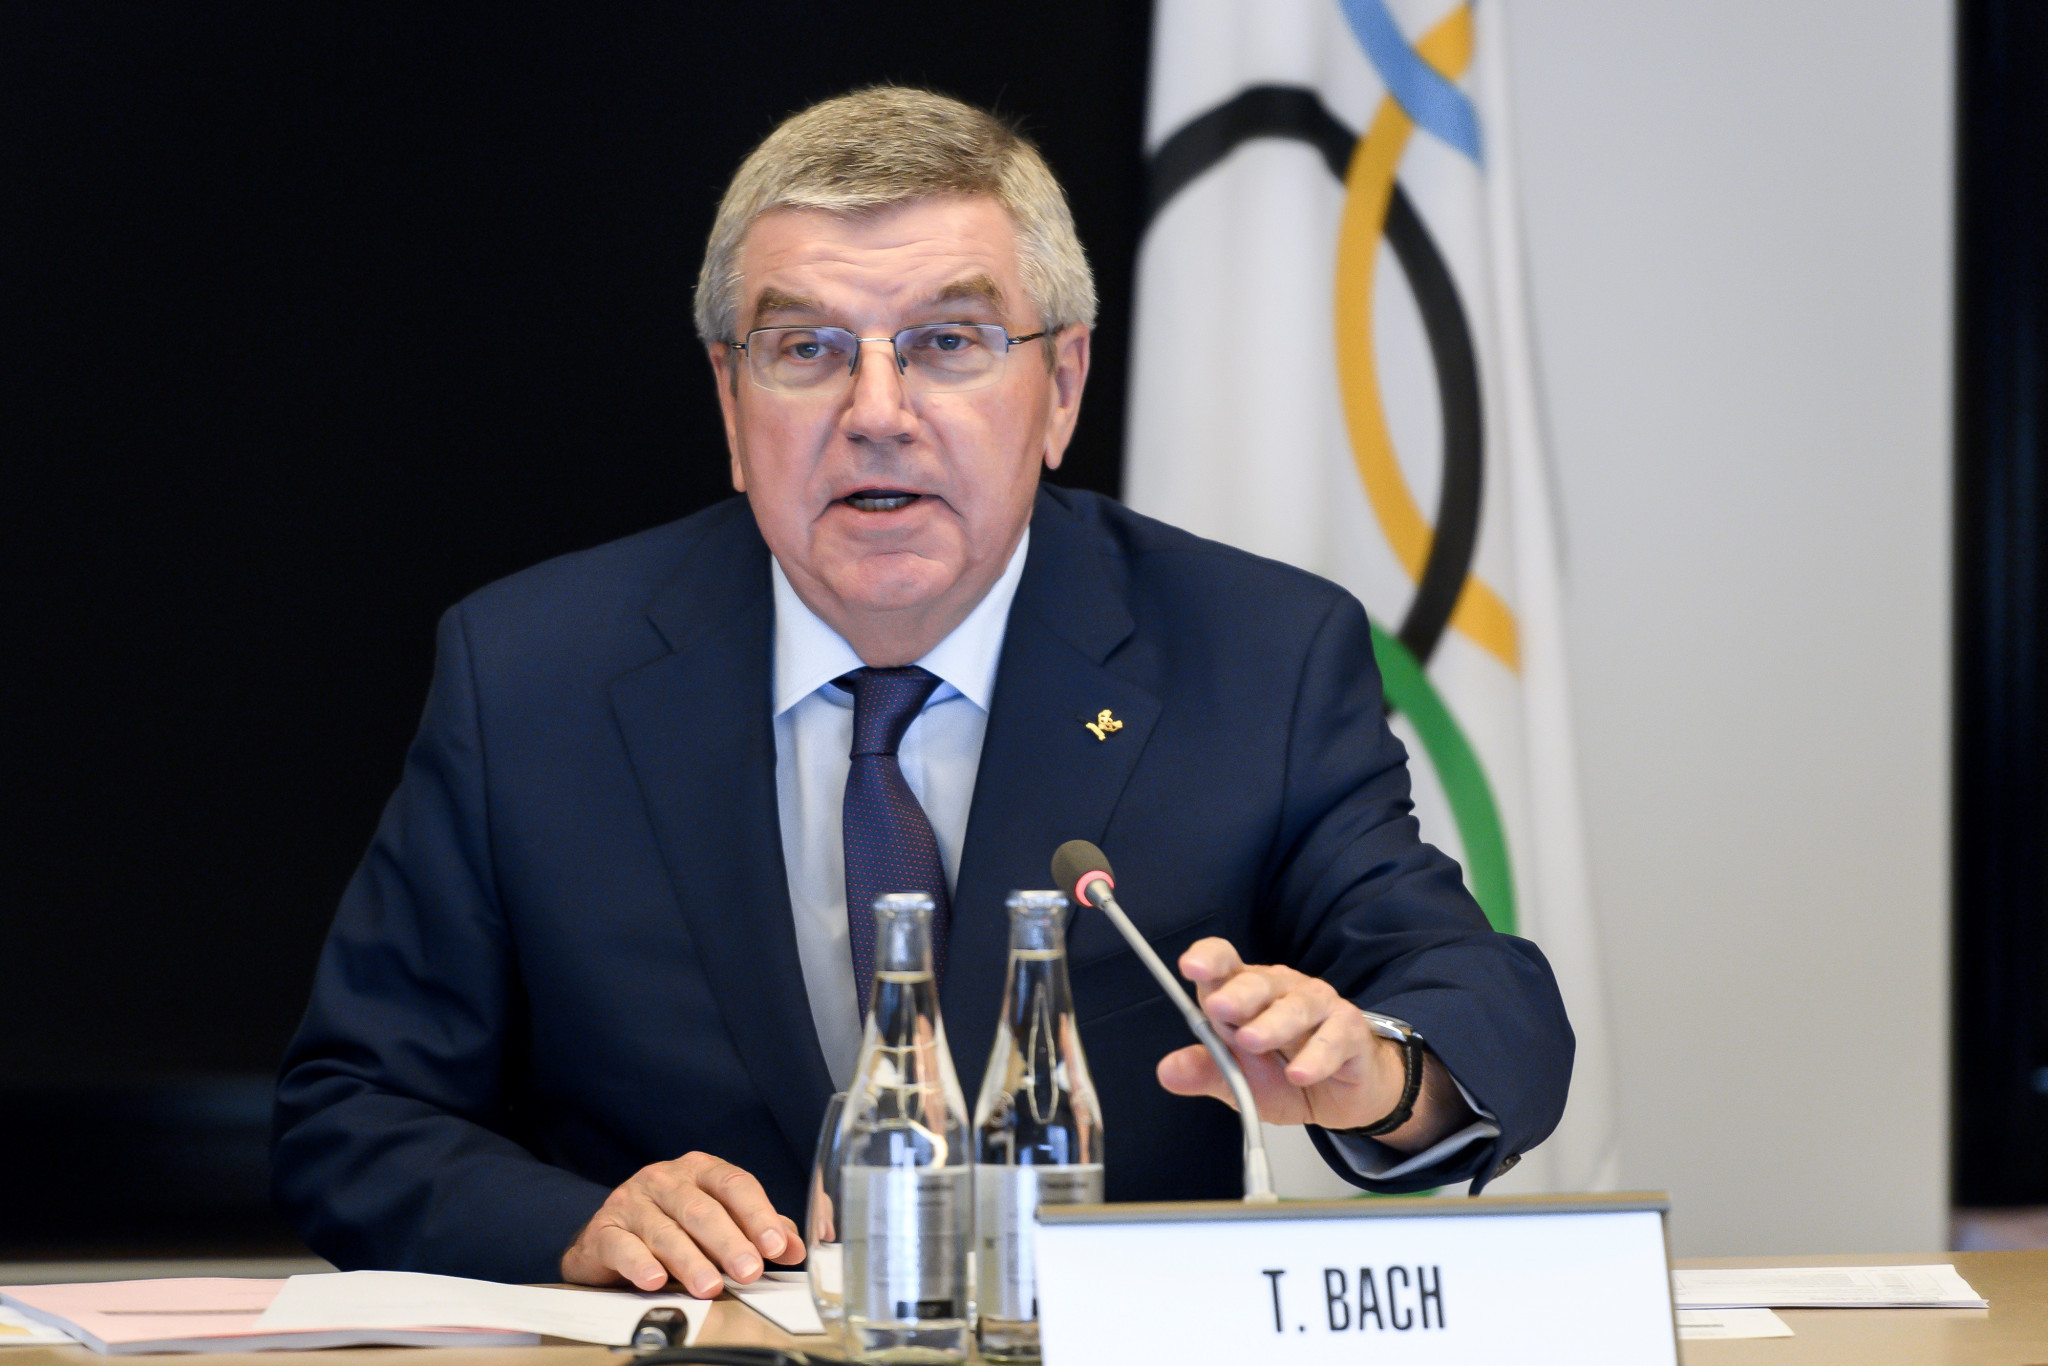 IOC President Thomas Bach said the proposals allowed for greater flexibility in the bidding process ©Getty Images